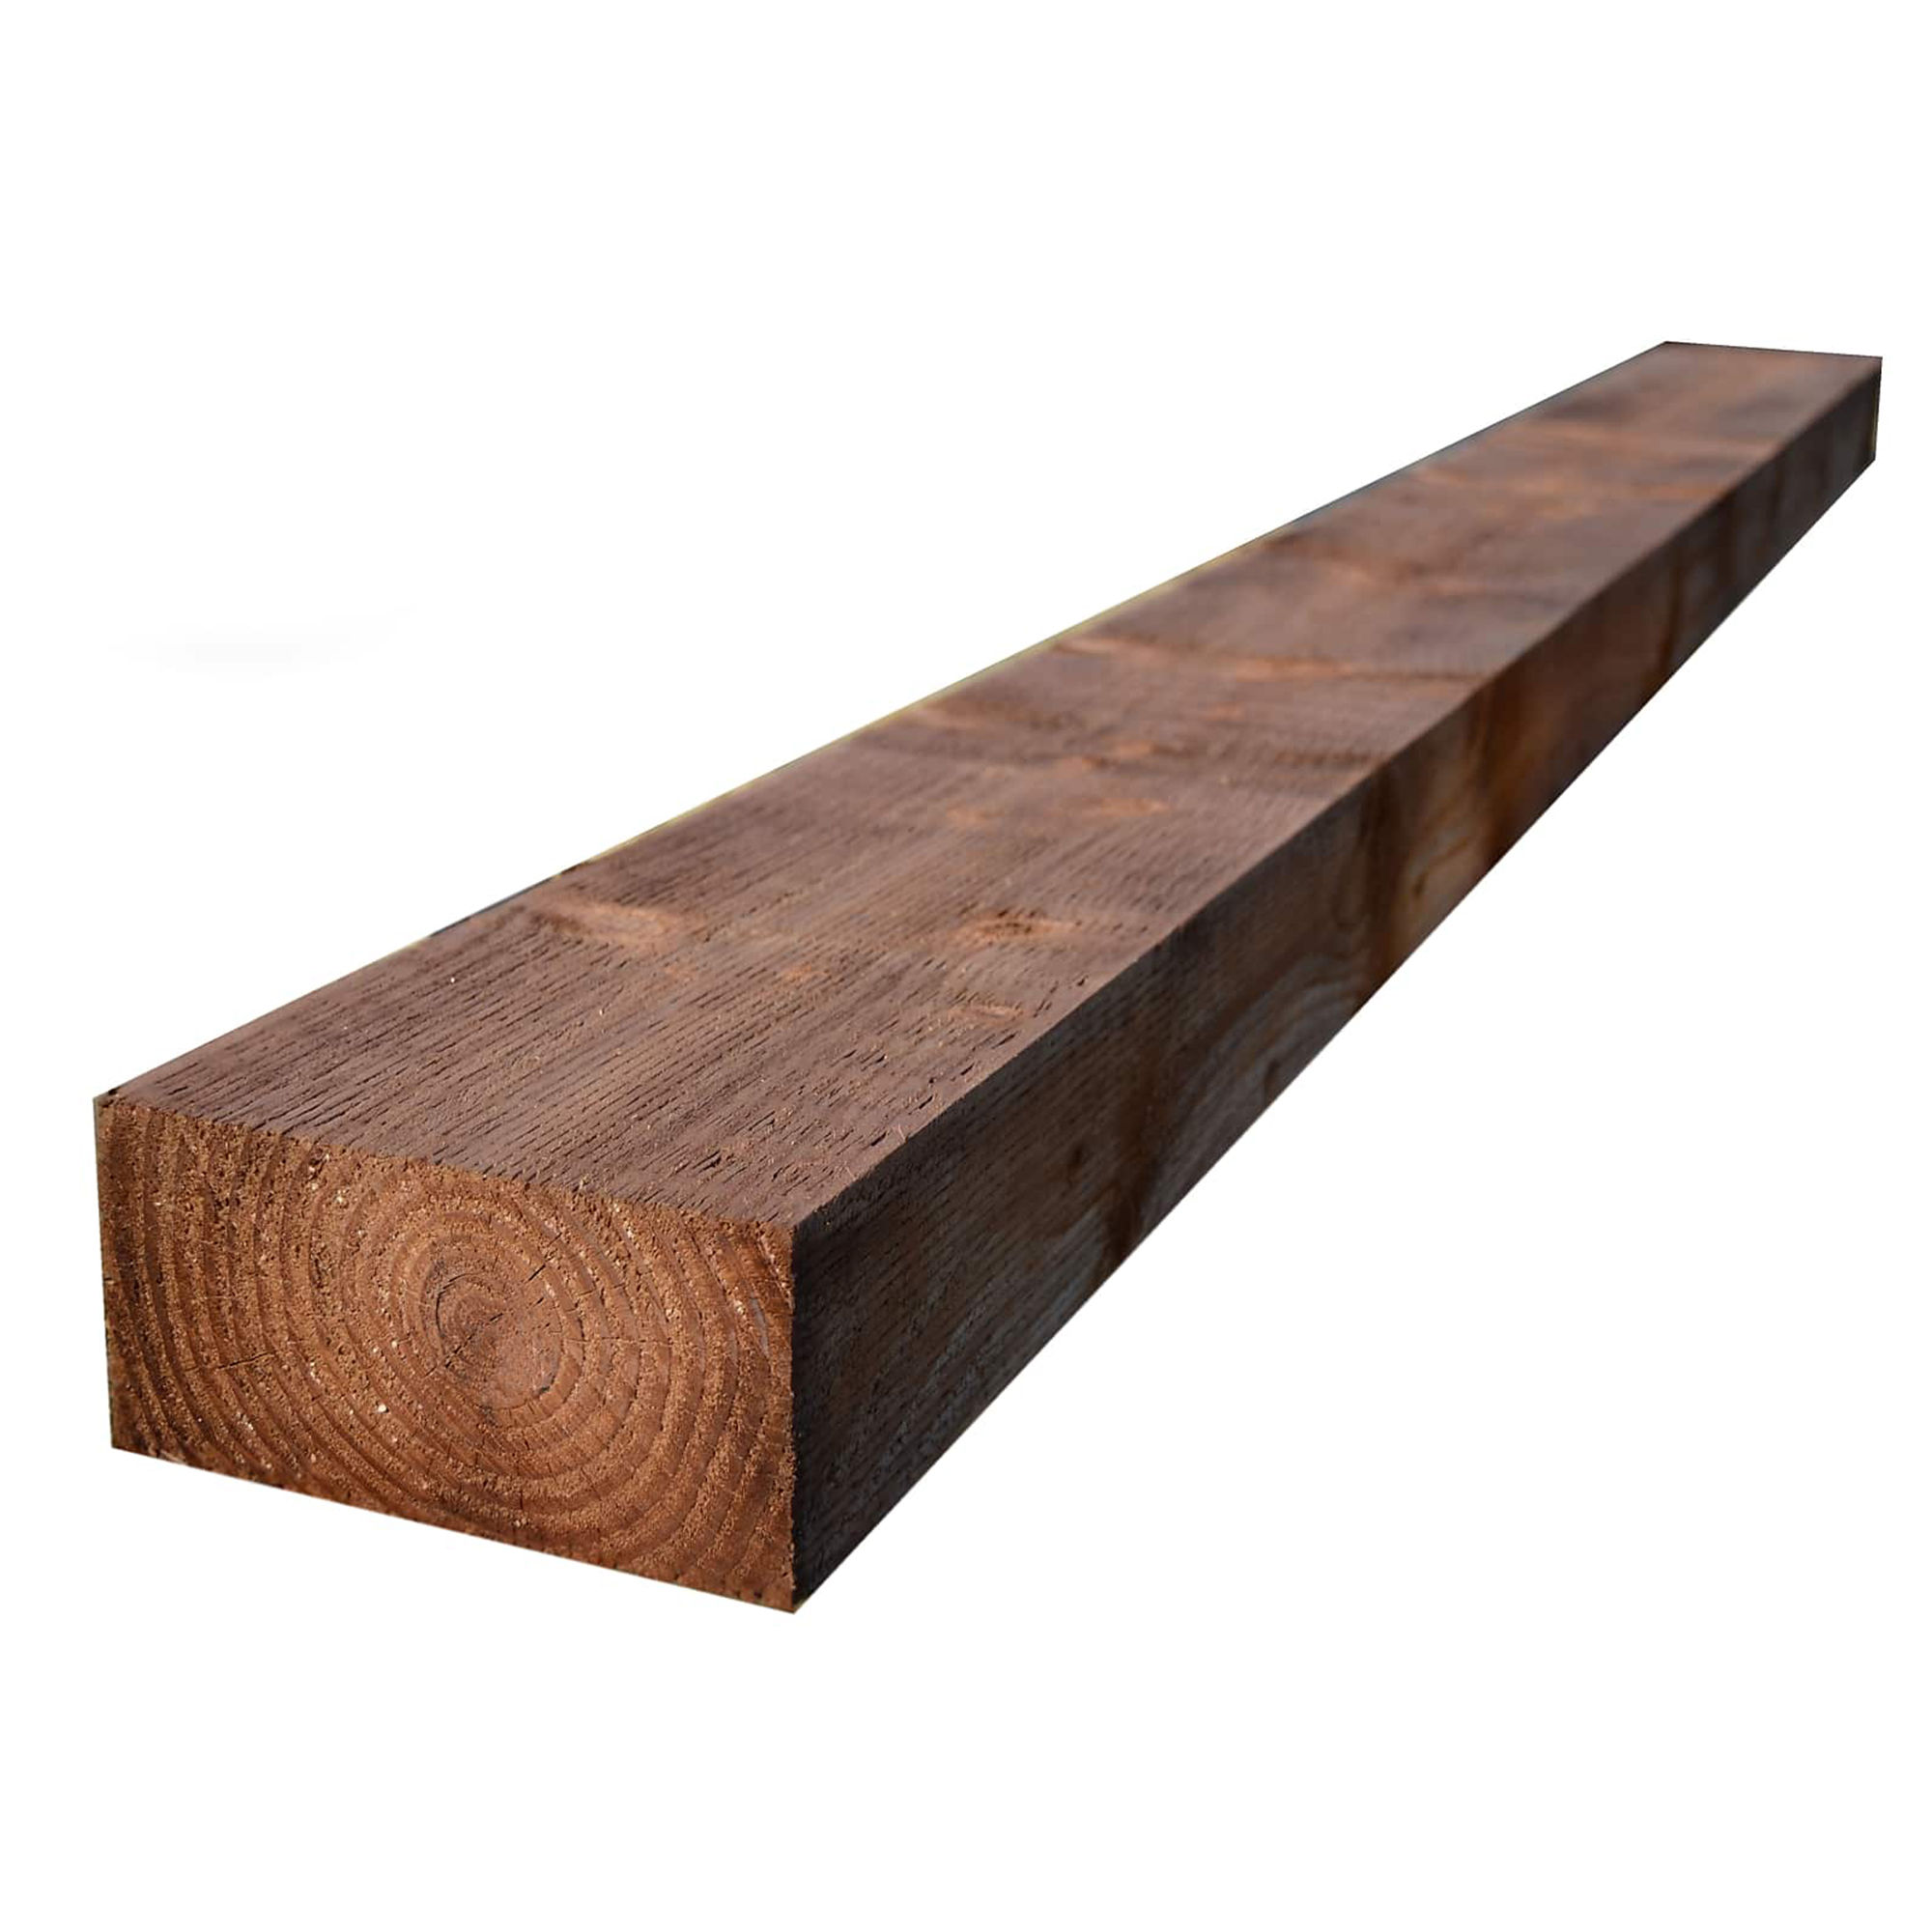 Garden Sleeper Treated Softwood Tanatone Brown (Finished Size 120mm x 245mm)